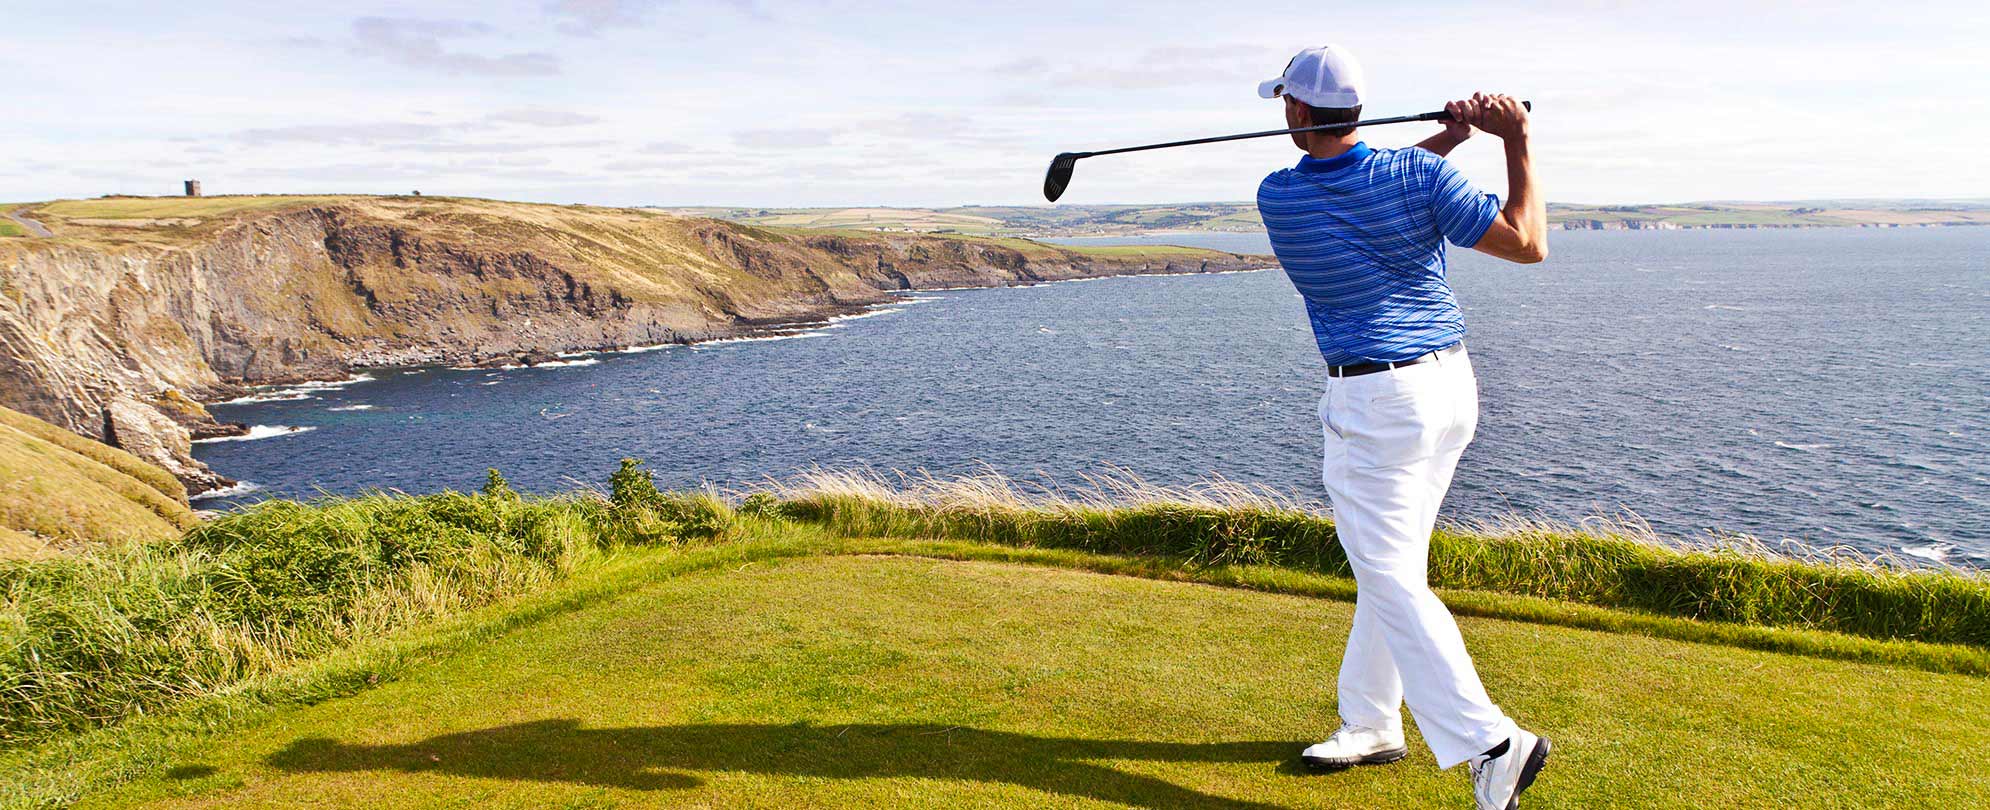 A golfer posing on a clifftop golf course overlooking the water